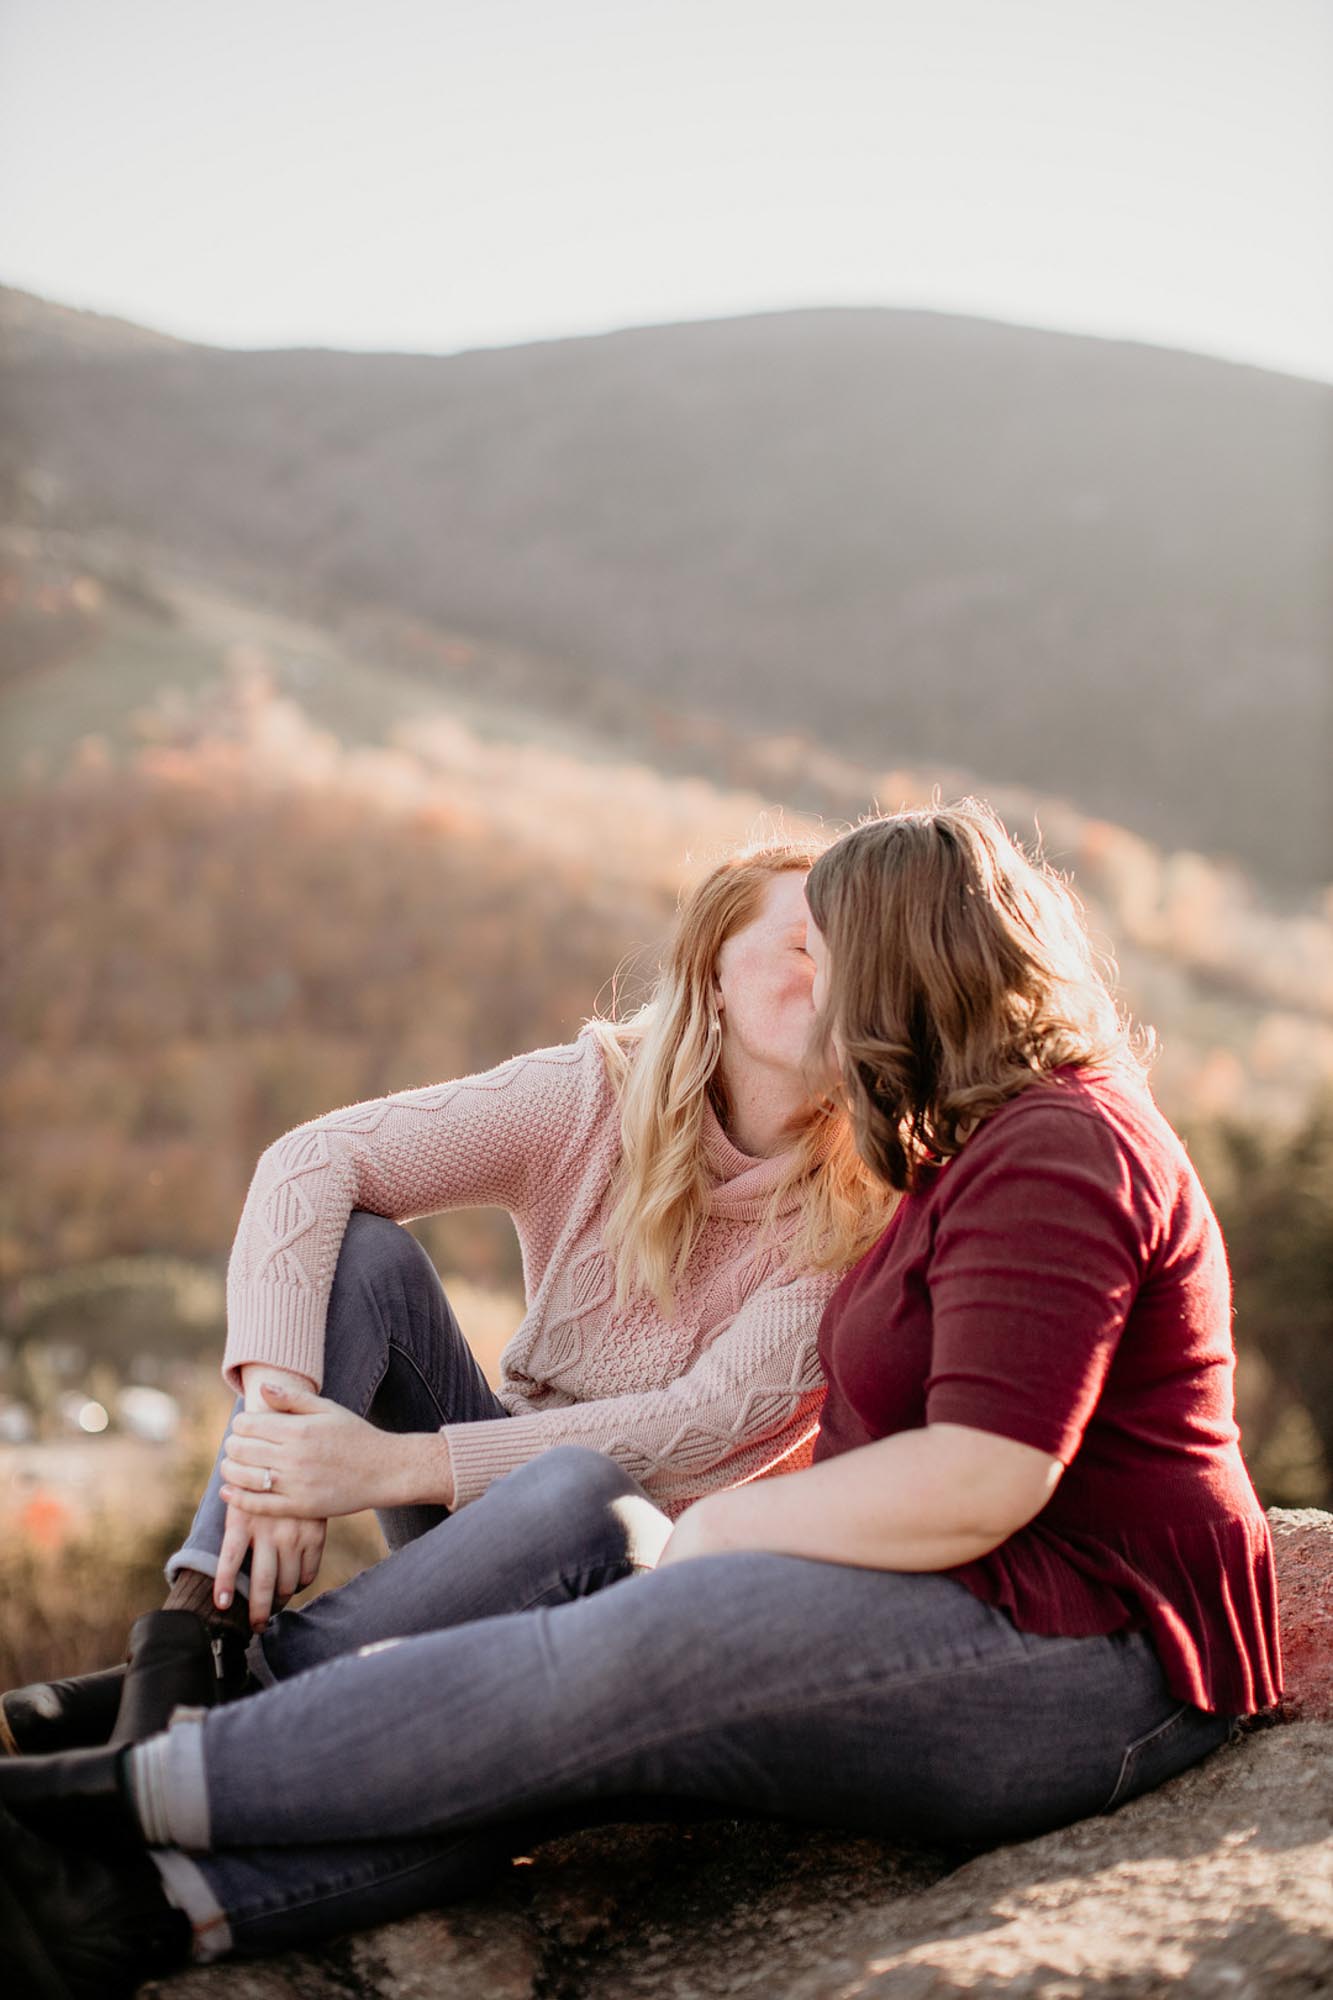 Sunny mountaintop engagement session after board game proposal | Seas Mtns Co | Featured on Equally Wed, the leading LGBTQ+ wedding magazine